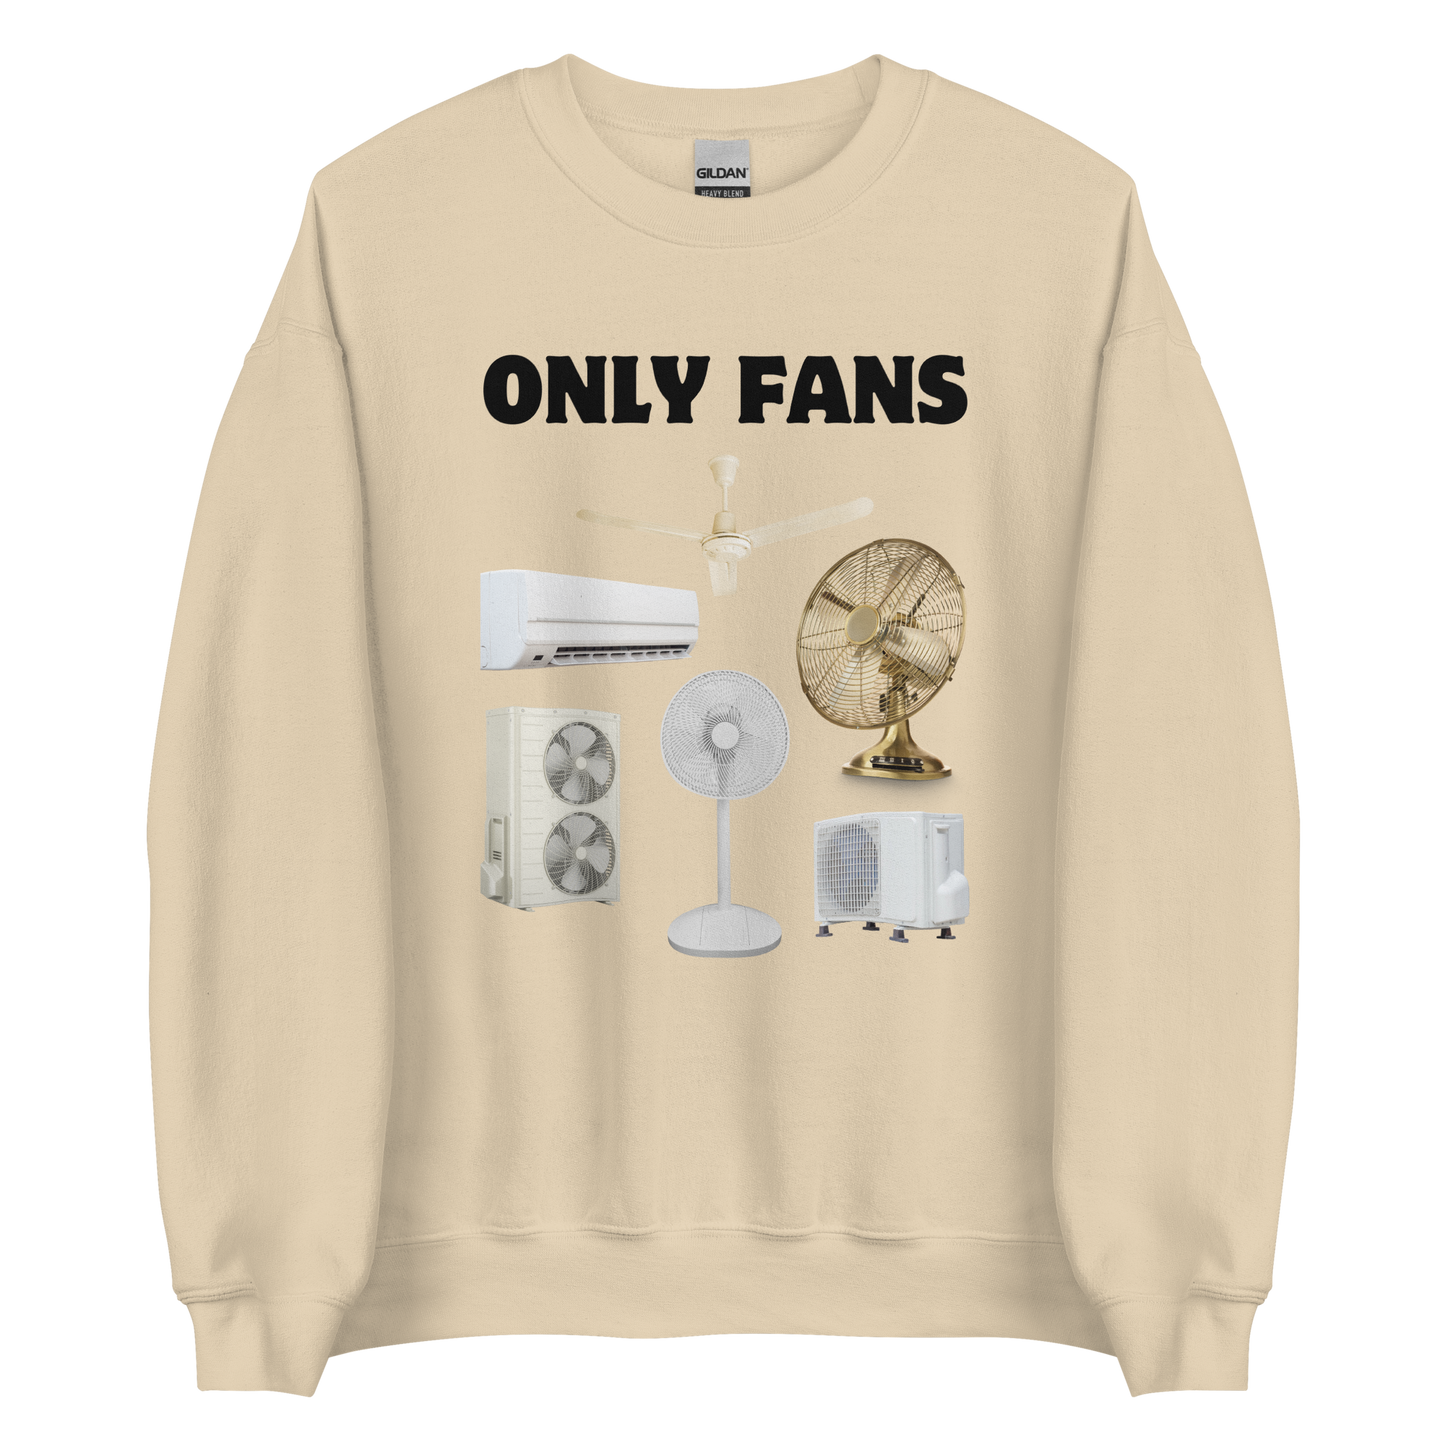 Sand Colored Only Fans Sweatshirt featuring a fun Fans graphic on the chest - Best Graphic Sweatshirts - Boozy Fox